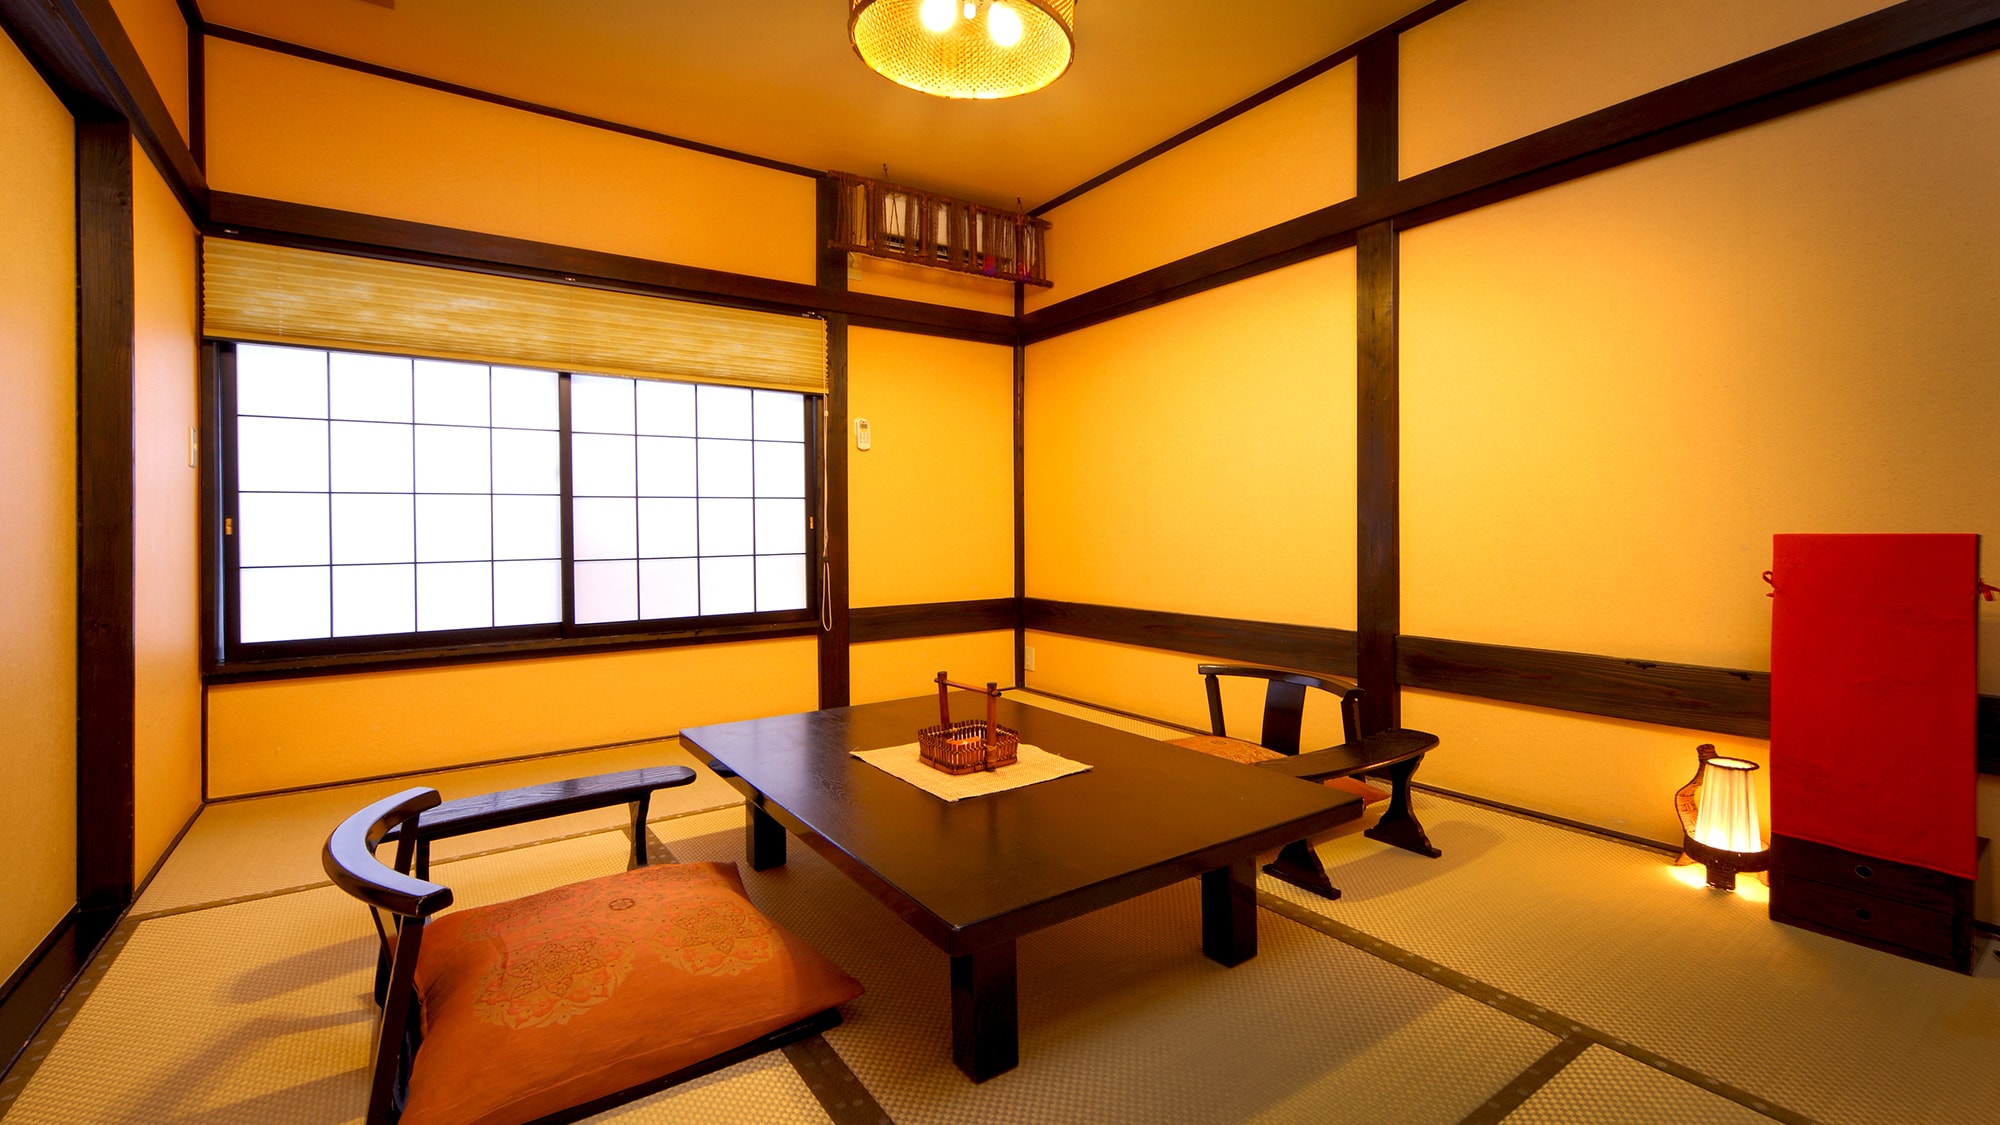 Room for 2 people (6.5 tatami mats)